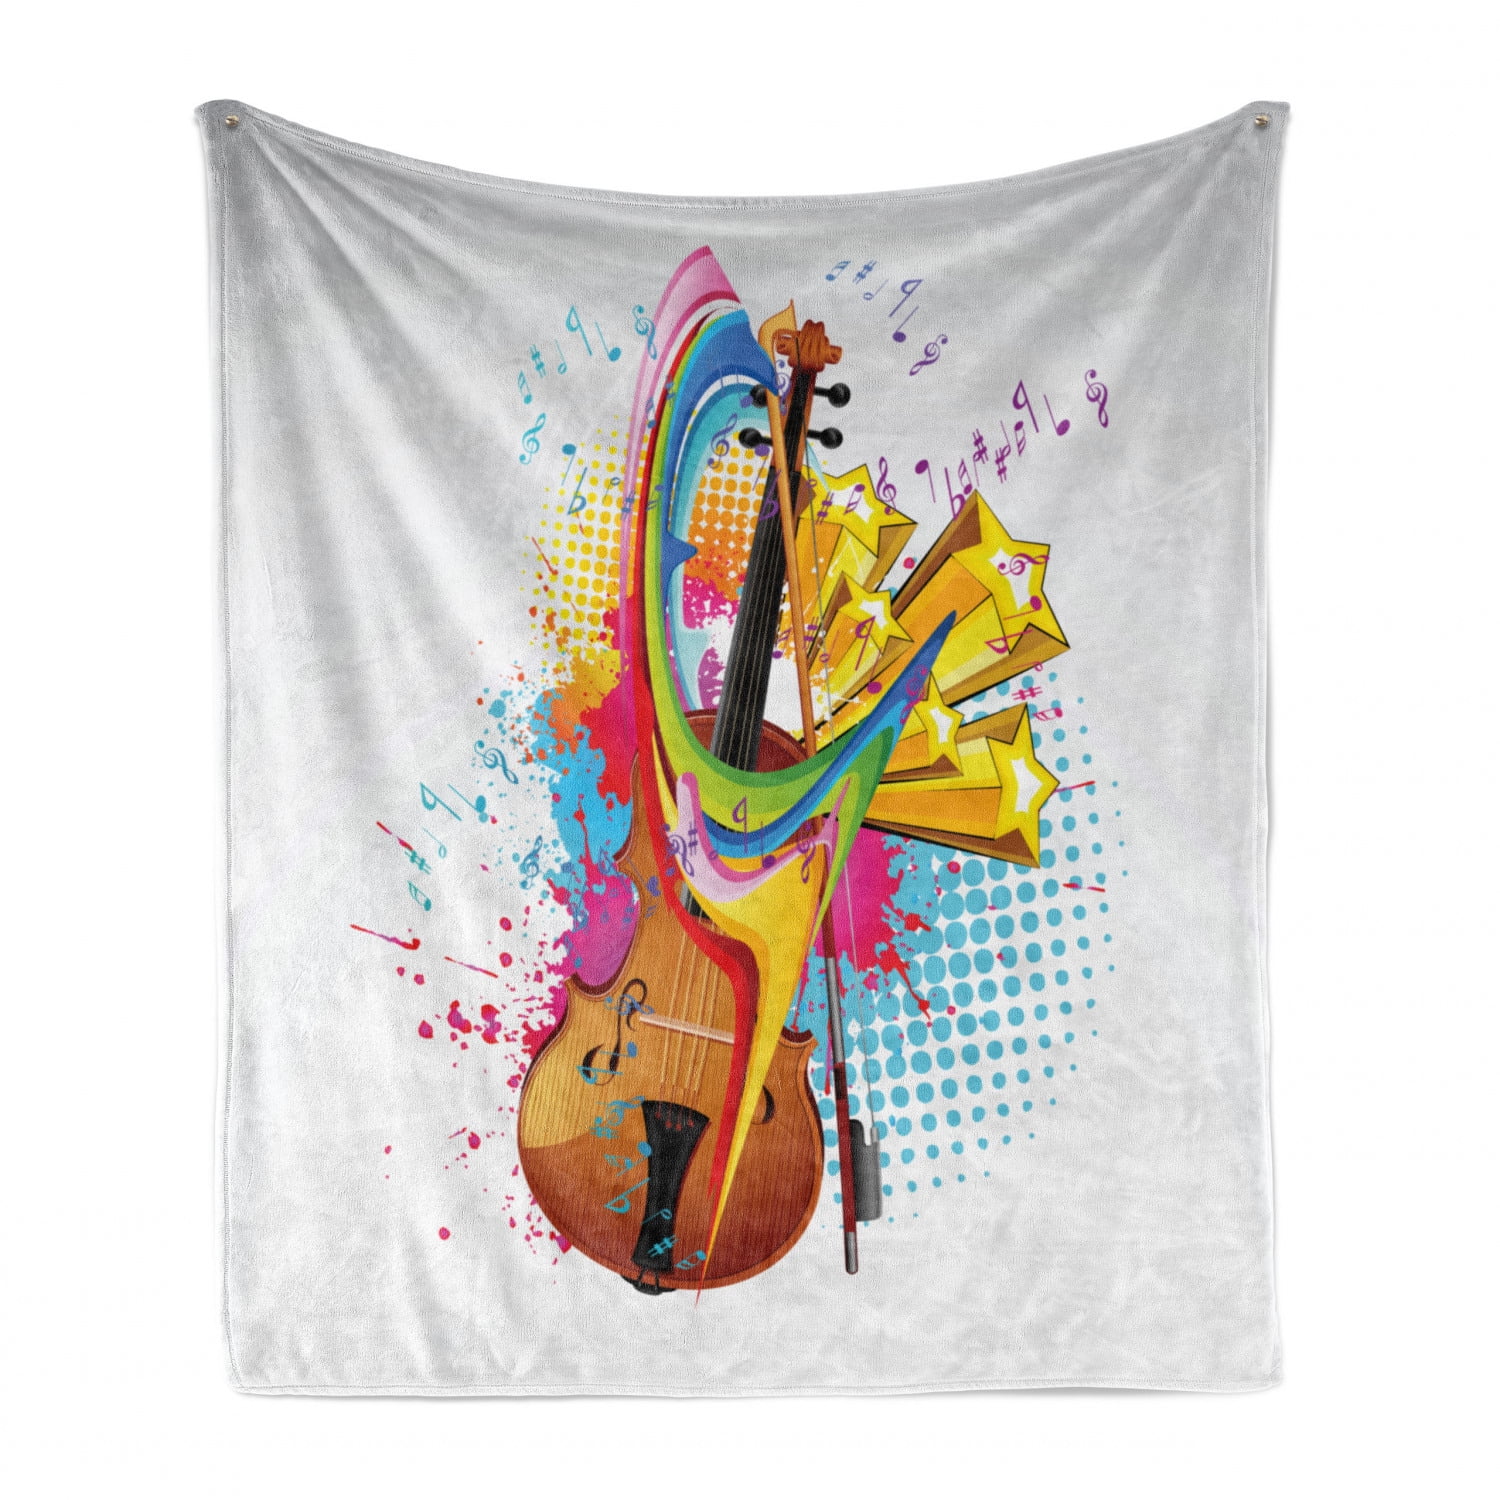 Illustration of American Young Woman Portrait with Musical Instruments Print Ambesonne Music Soft Flannel Fleece Throw Blanket 50 x 60 Multicolor Cozy Plush for Indoor and Outdoor Use 